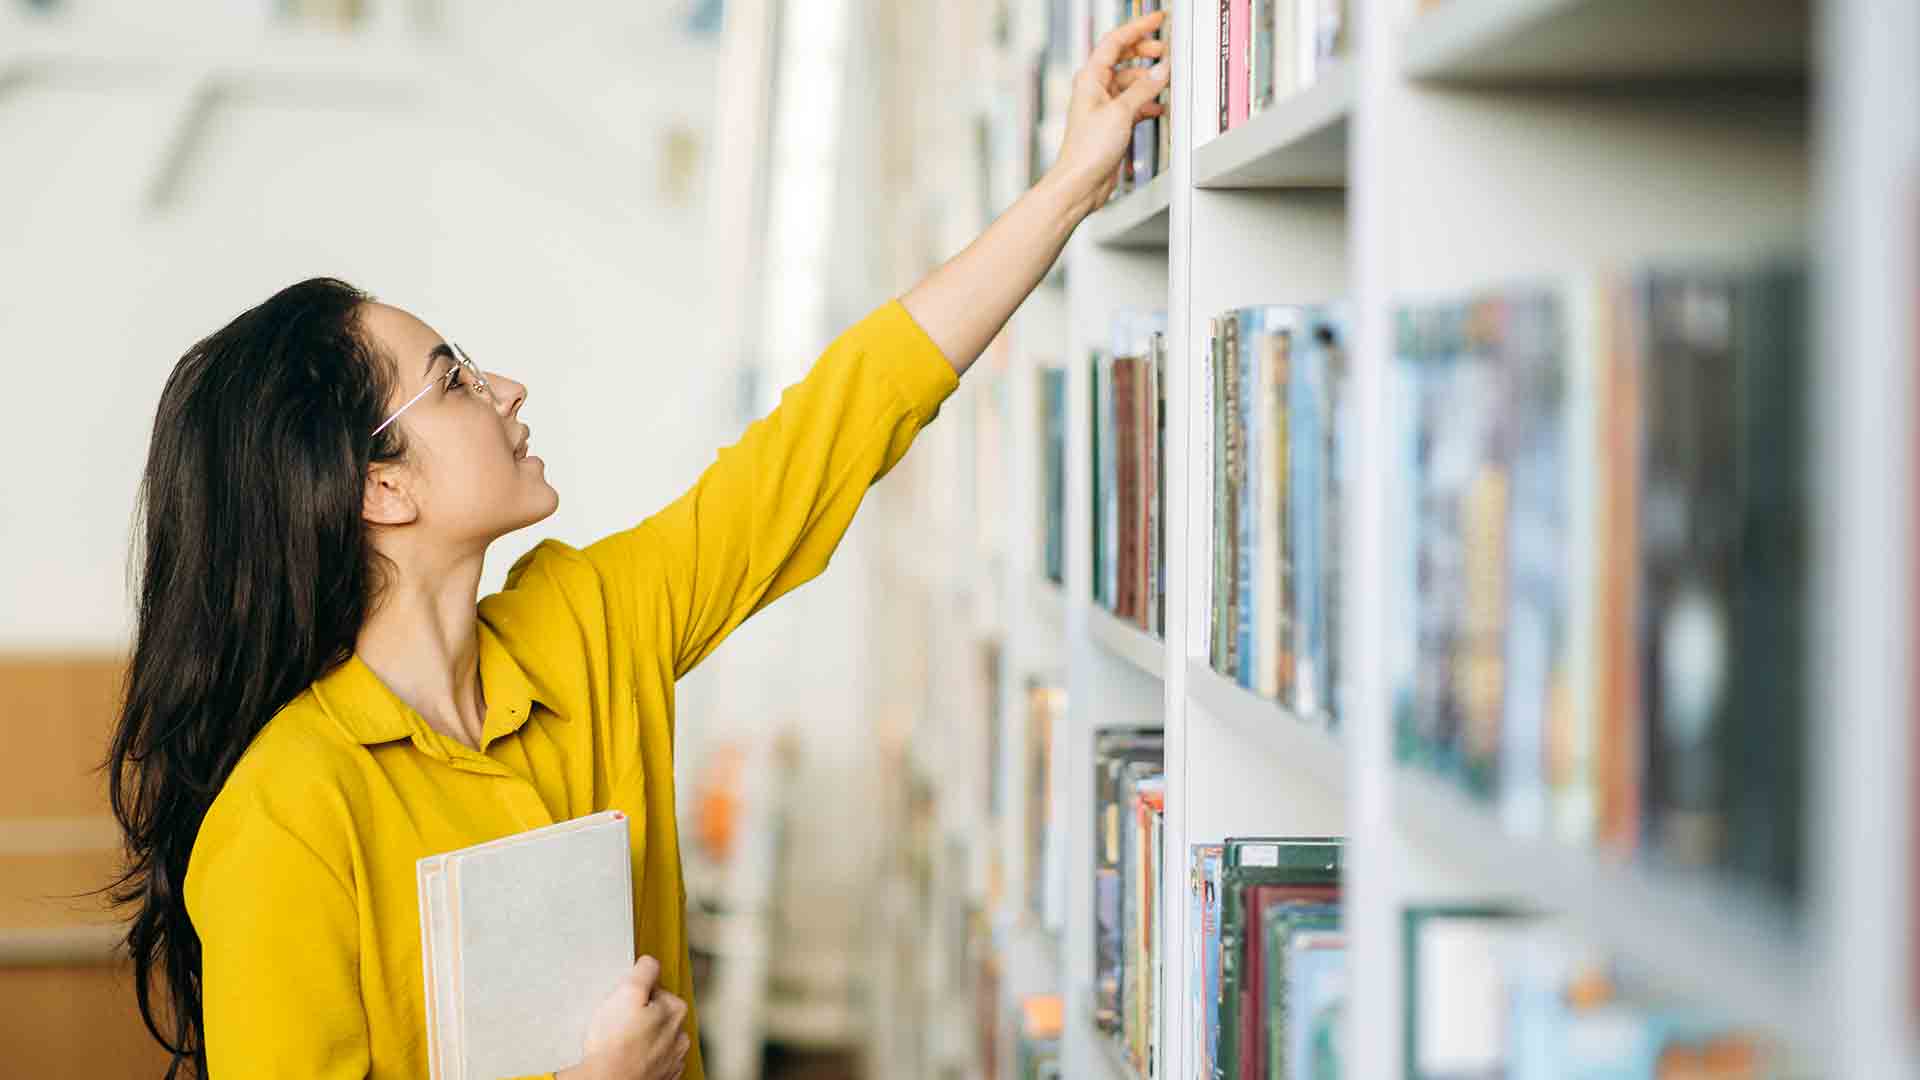 The key role of libraries and staff is recognised by the awards © Shutterstock